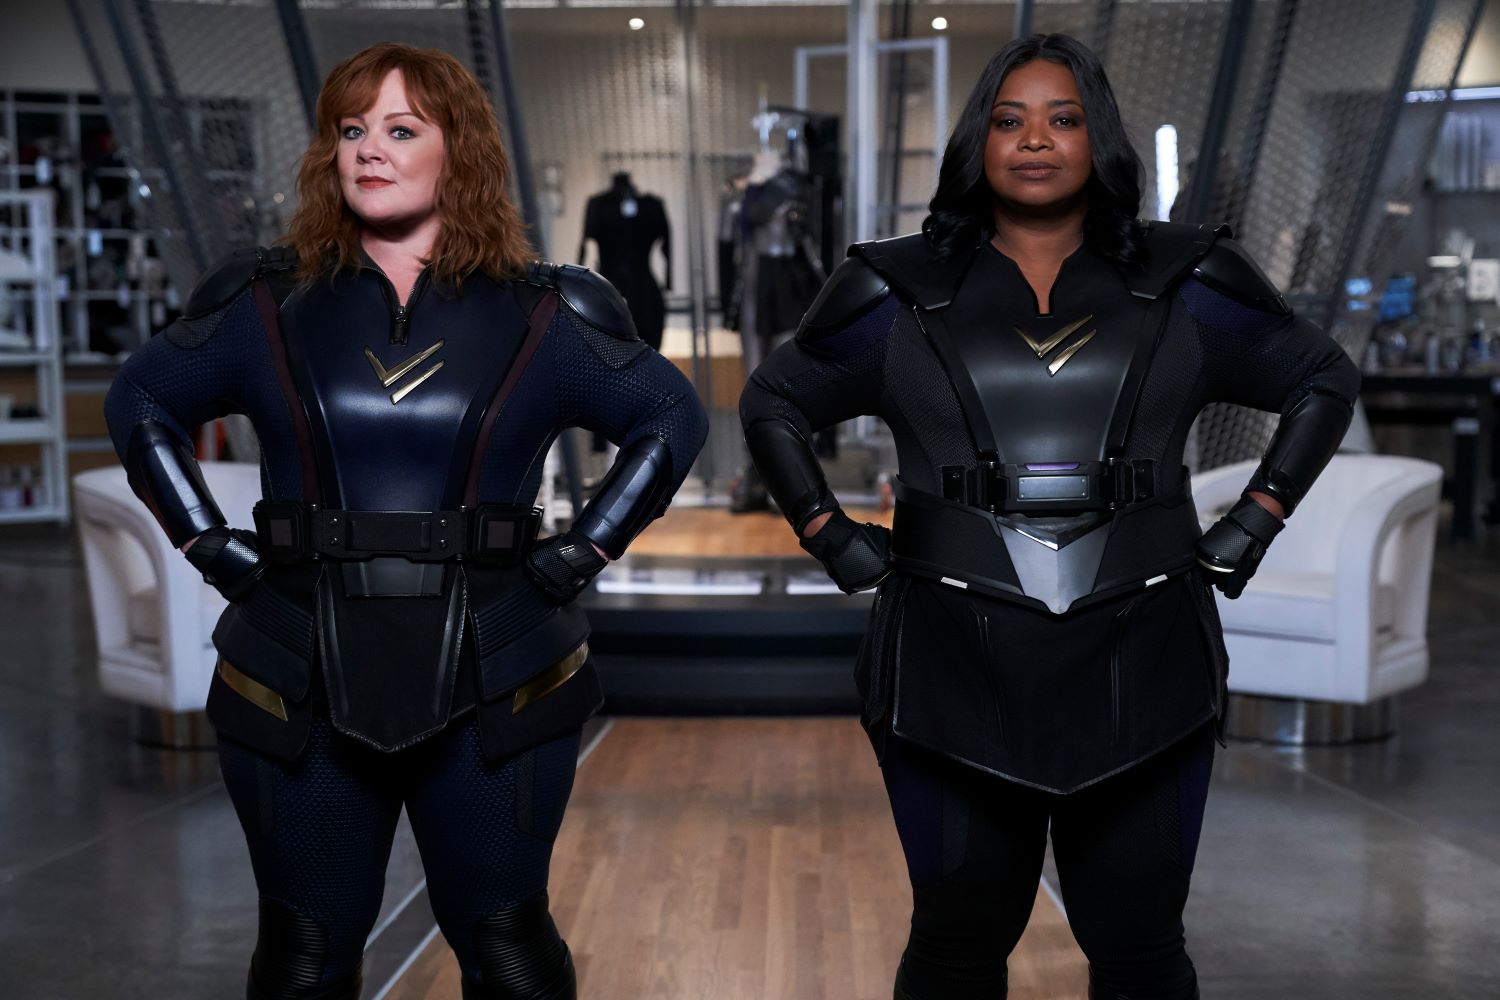 Melissa McCarthy and Octavia Spencer in 'Thunder Force'